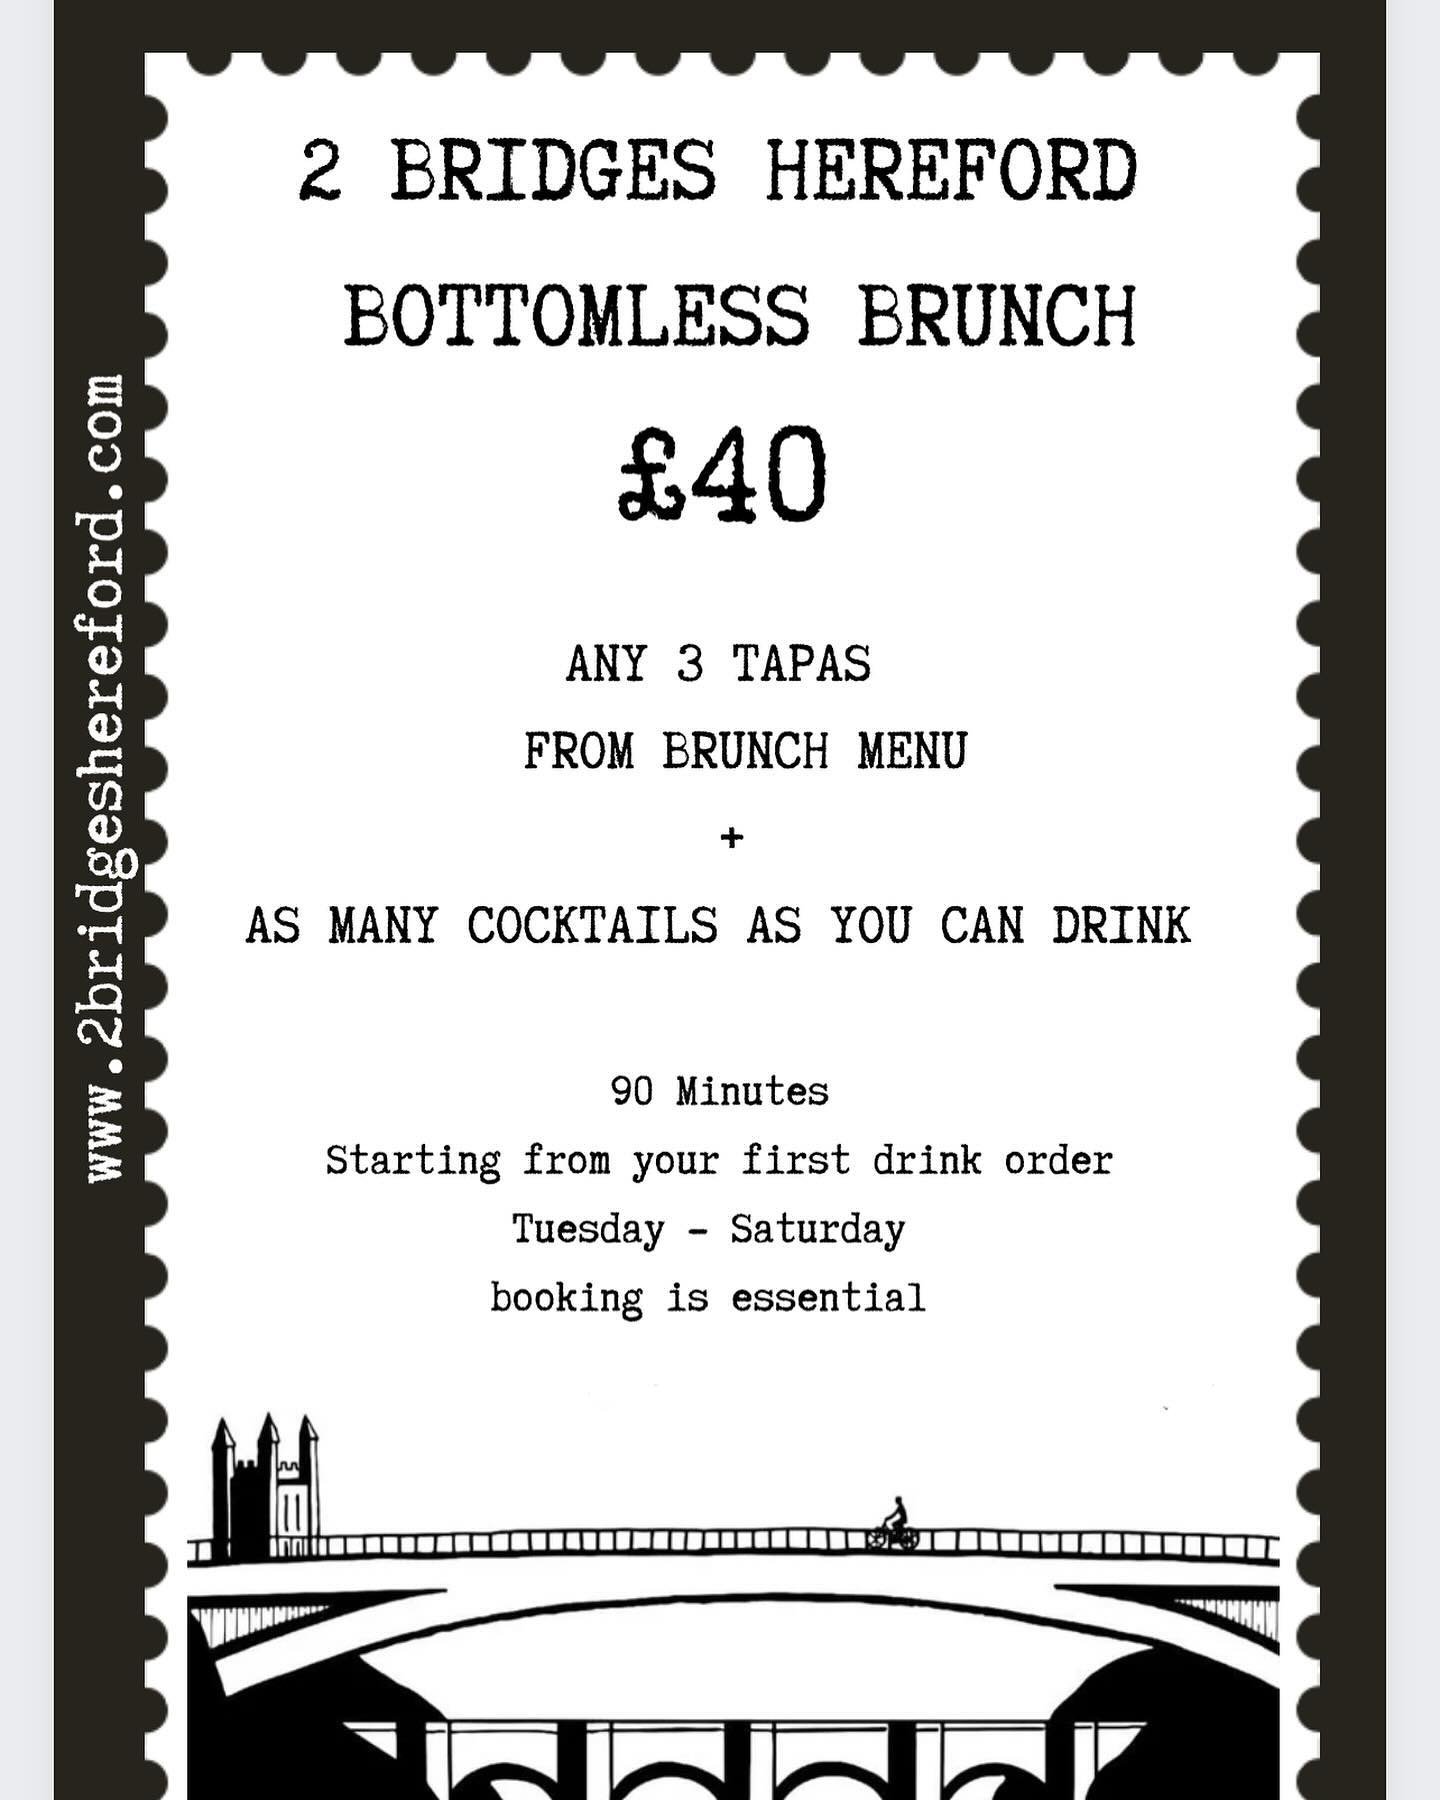 -𝘽𝙊𝙏𝙏𝙊𝙈𝙇𝙀𝙎𝙎 𝘽𝙍𝙐𝙉𝘾𝙃-

Exciting news! Bottomless brunch is finally happening at 2 Bridges! 
Check out the menus and don&rsquo;t wait book your table❤️